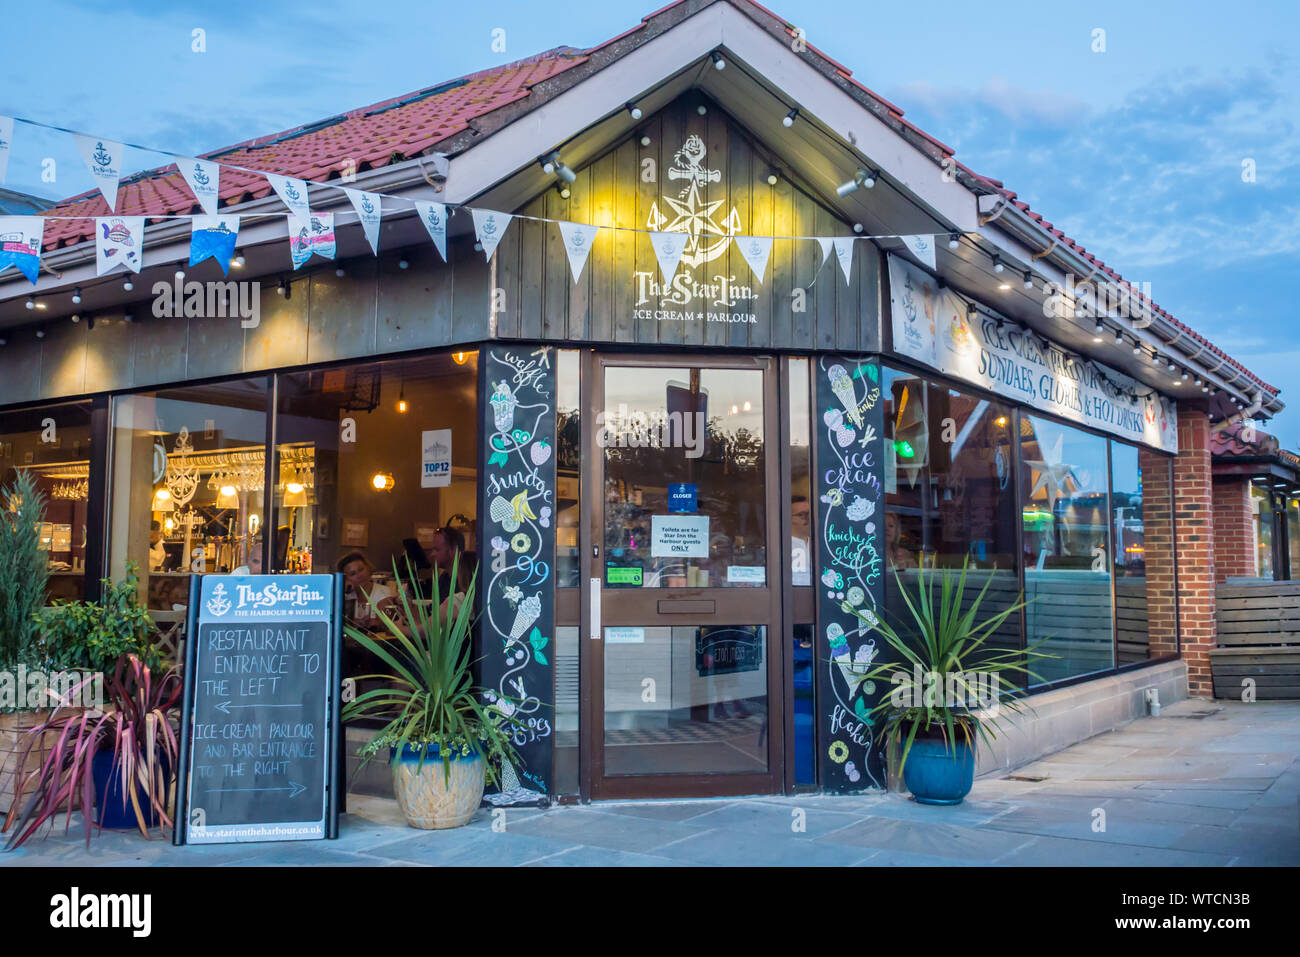 The Star Inn Restaurant & Ice Cream Parlour at Whitby, North Yorkshire Stock Photo